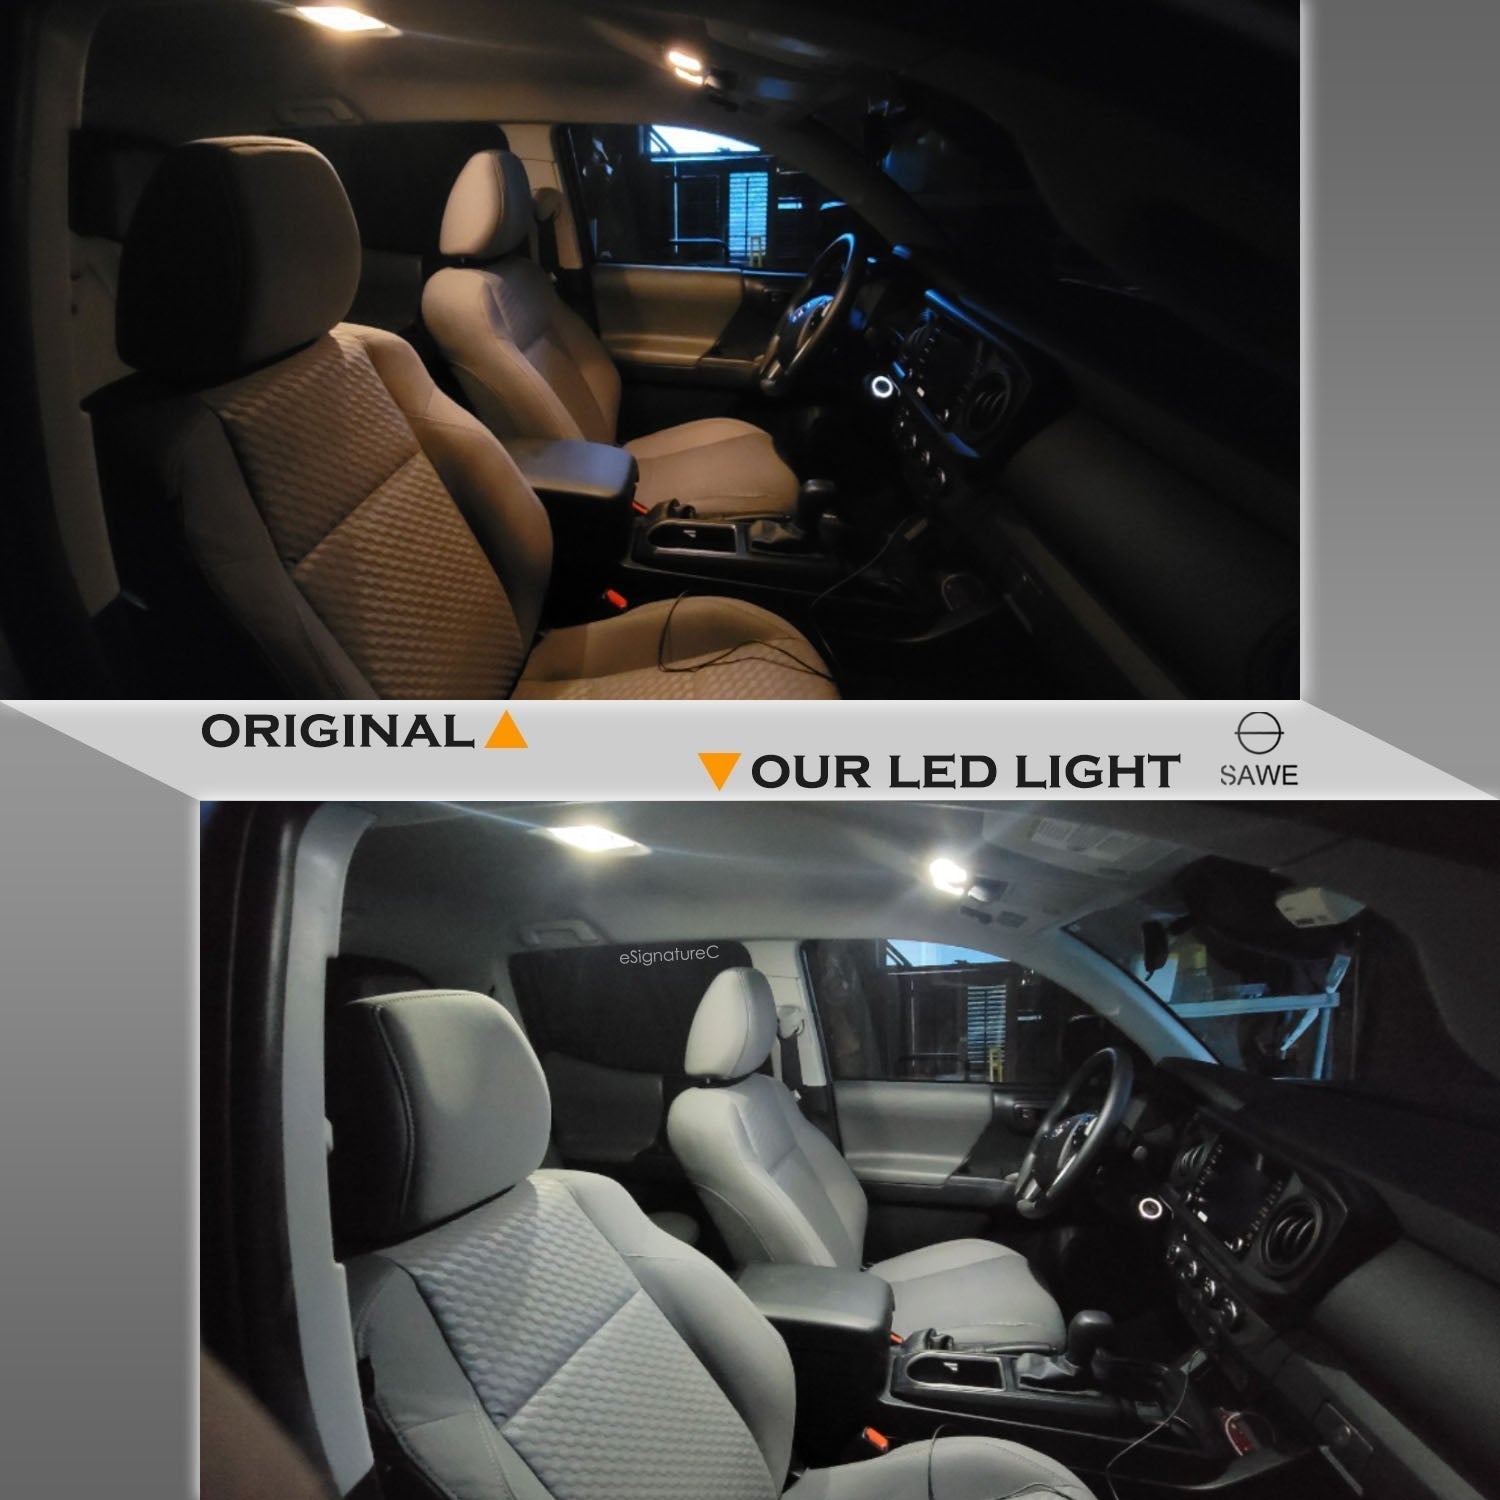 For Toyota Yaris Interior LED Lights - Dome & Map Lights Package Kit for 2012 - 2019 - White